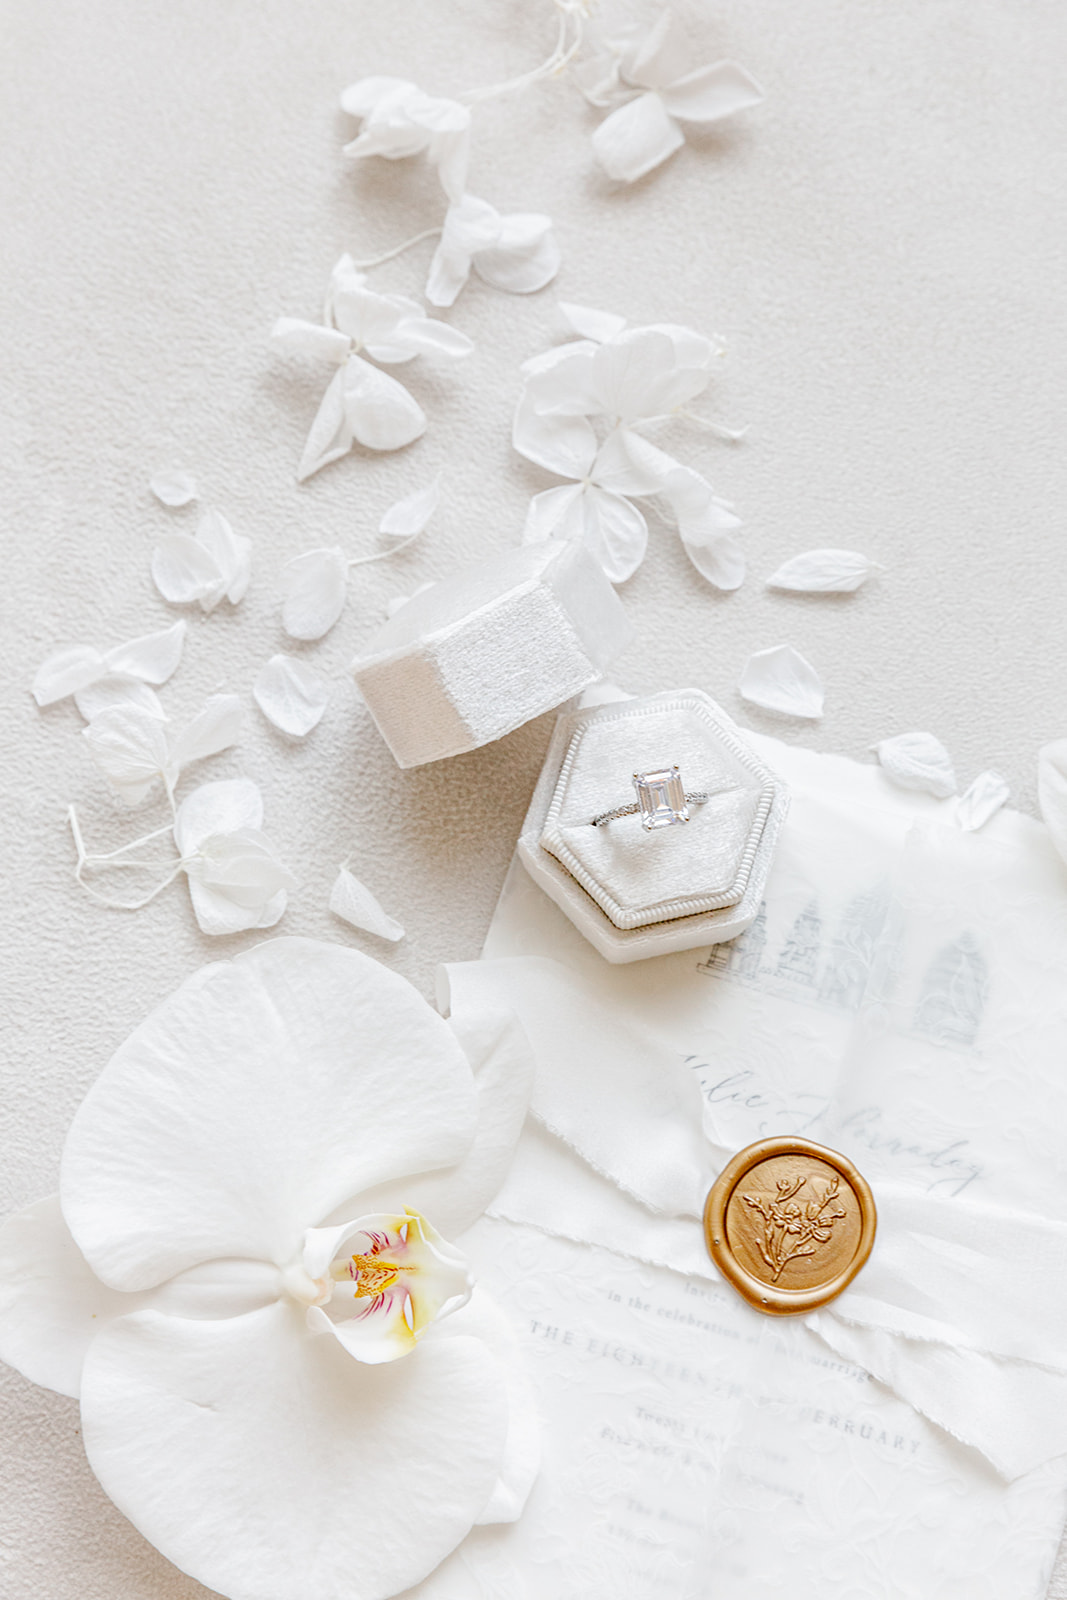 Clean and sophisticated white and cream wedding details captured by Revel Photography & Films. Invitation paper suite custom designed by Pink Umbrella Invites. 